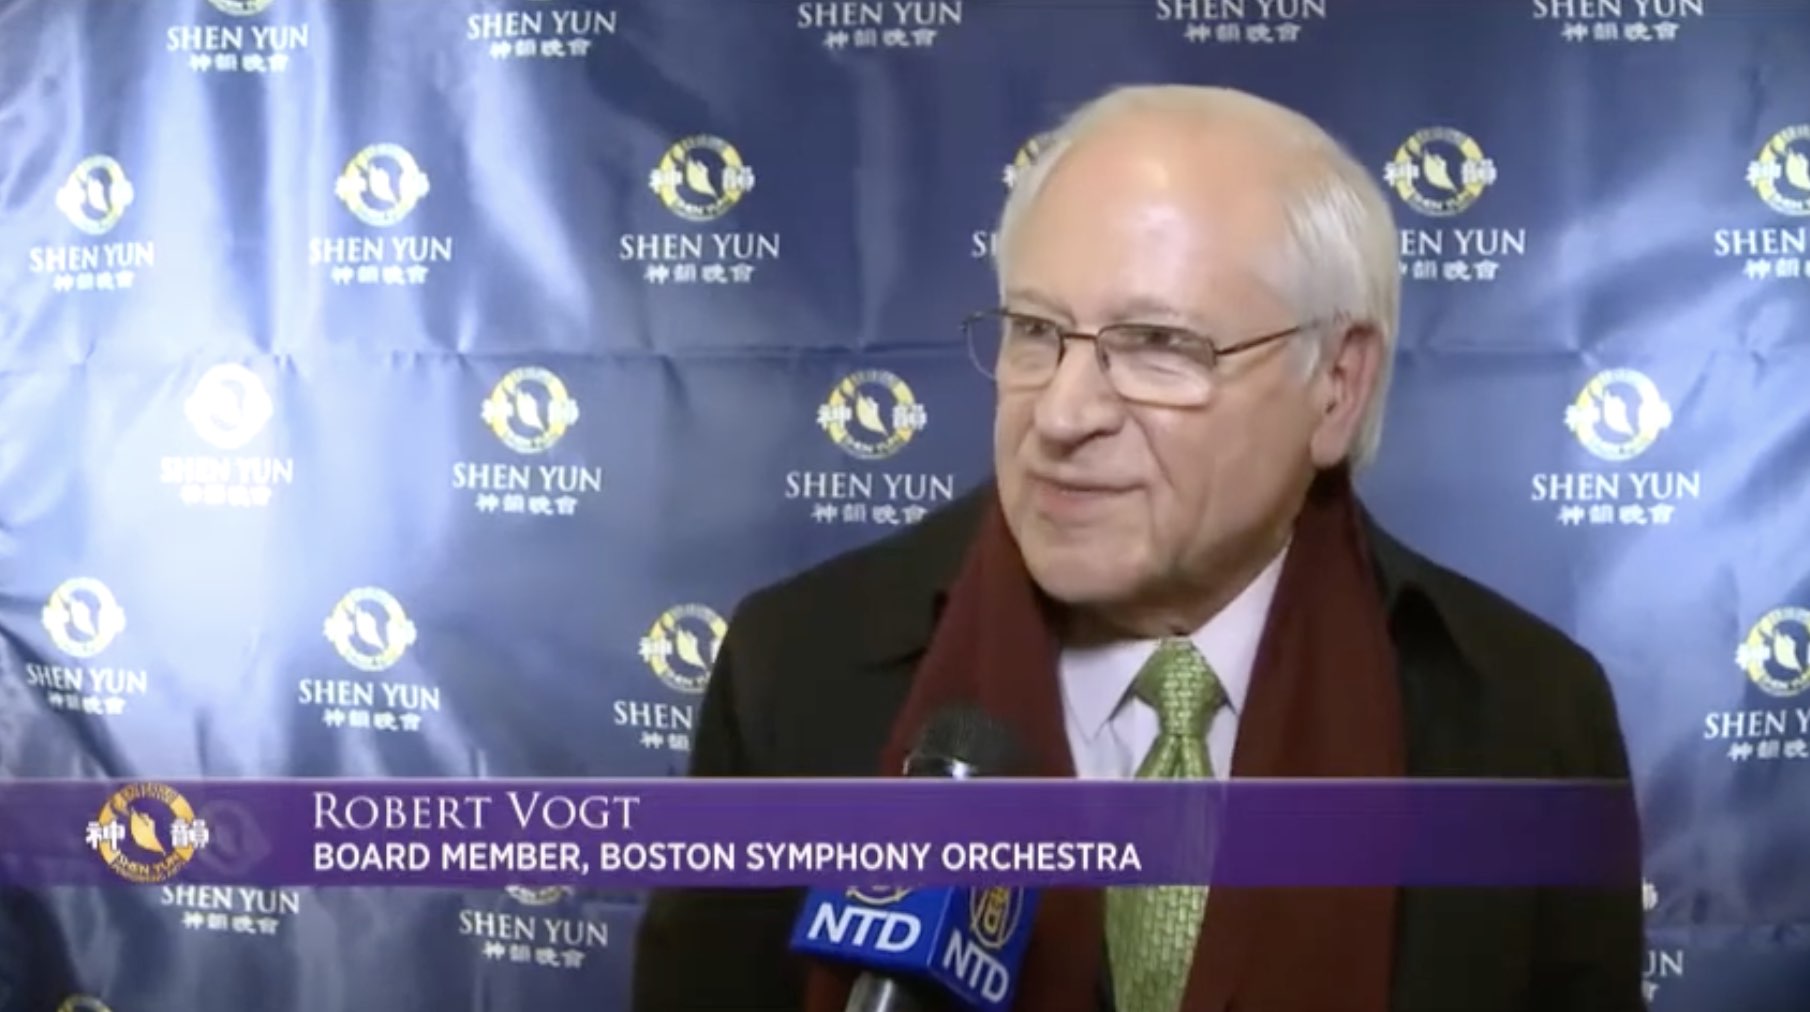 Shen Yun Review：”The Choreography Was the Best I’ve Seen in This World”